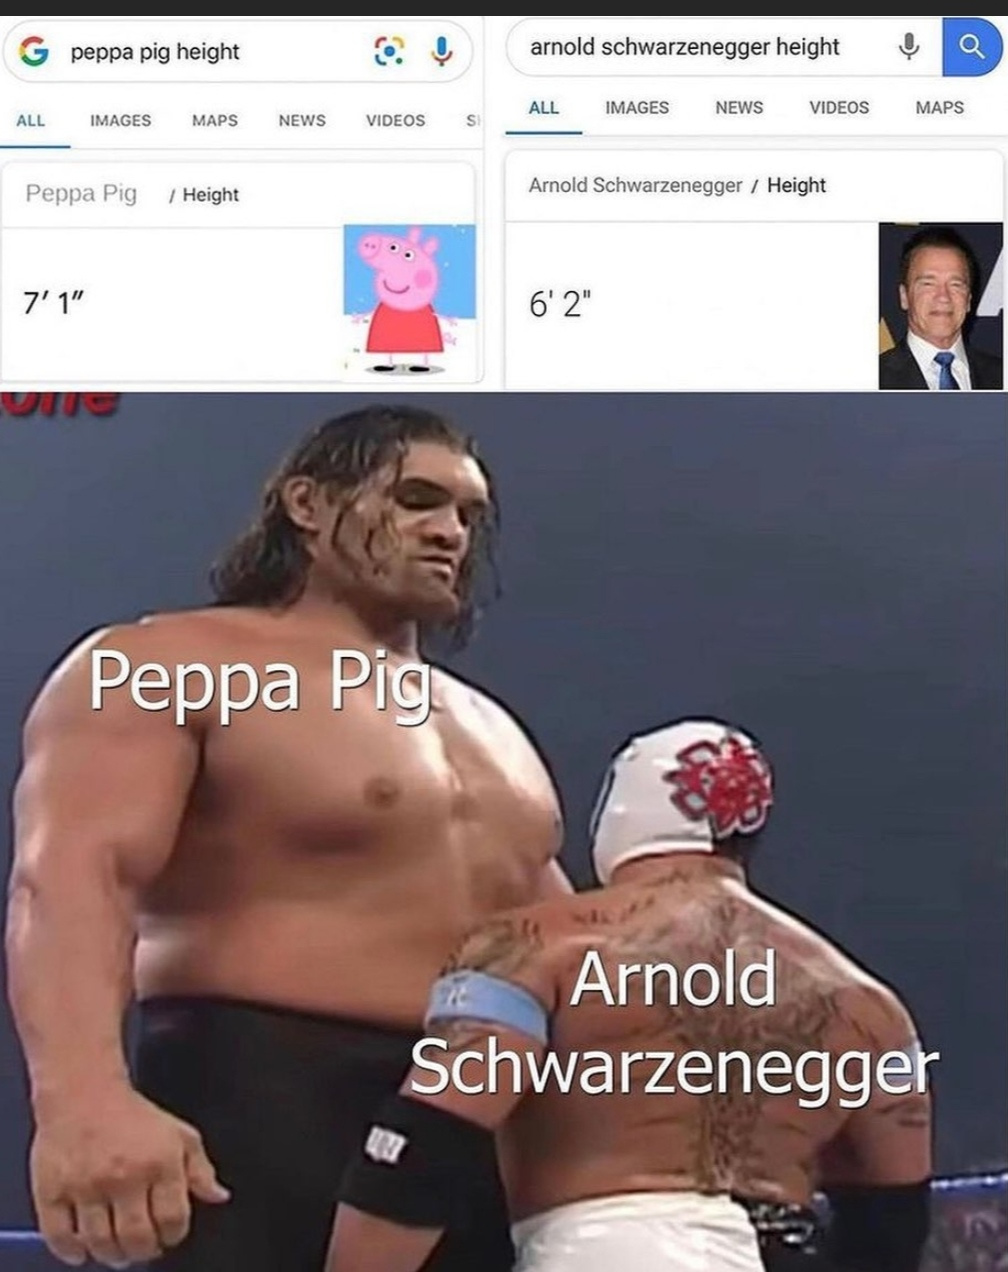 Oh yes, peppa pig is highter than Arnold - meme